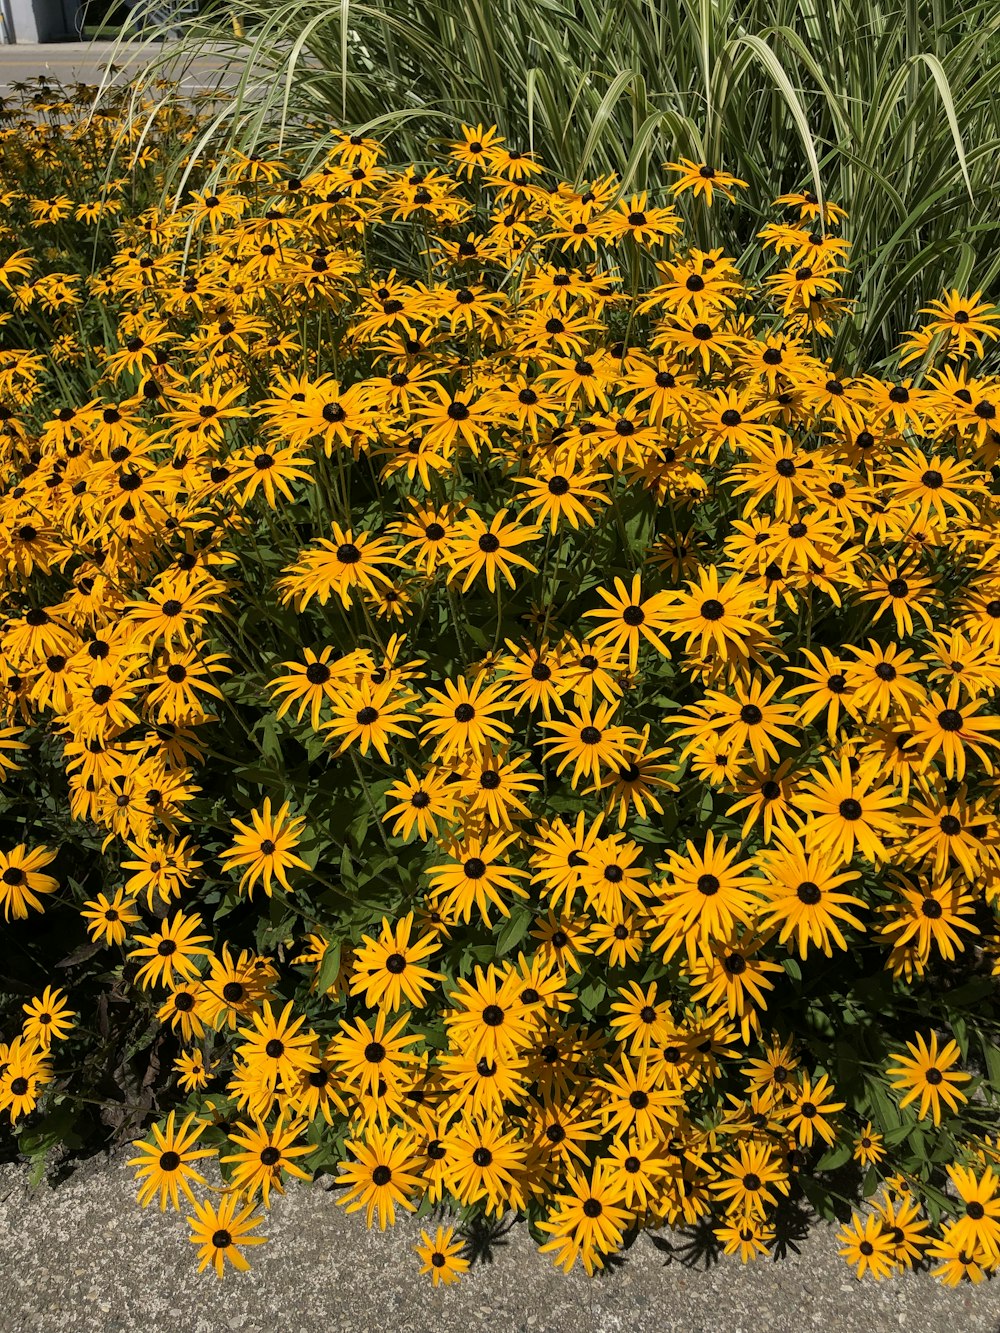 a bunch of yellow flowers that are by some grass